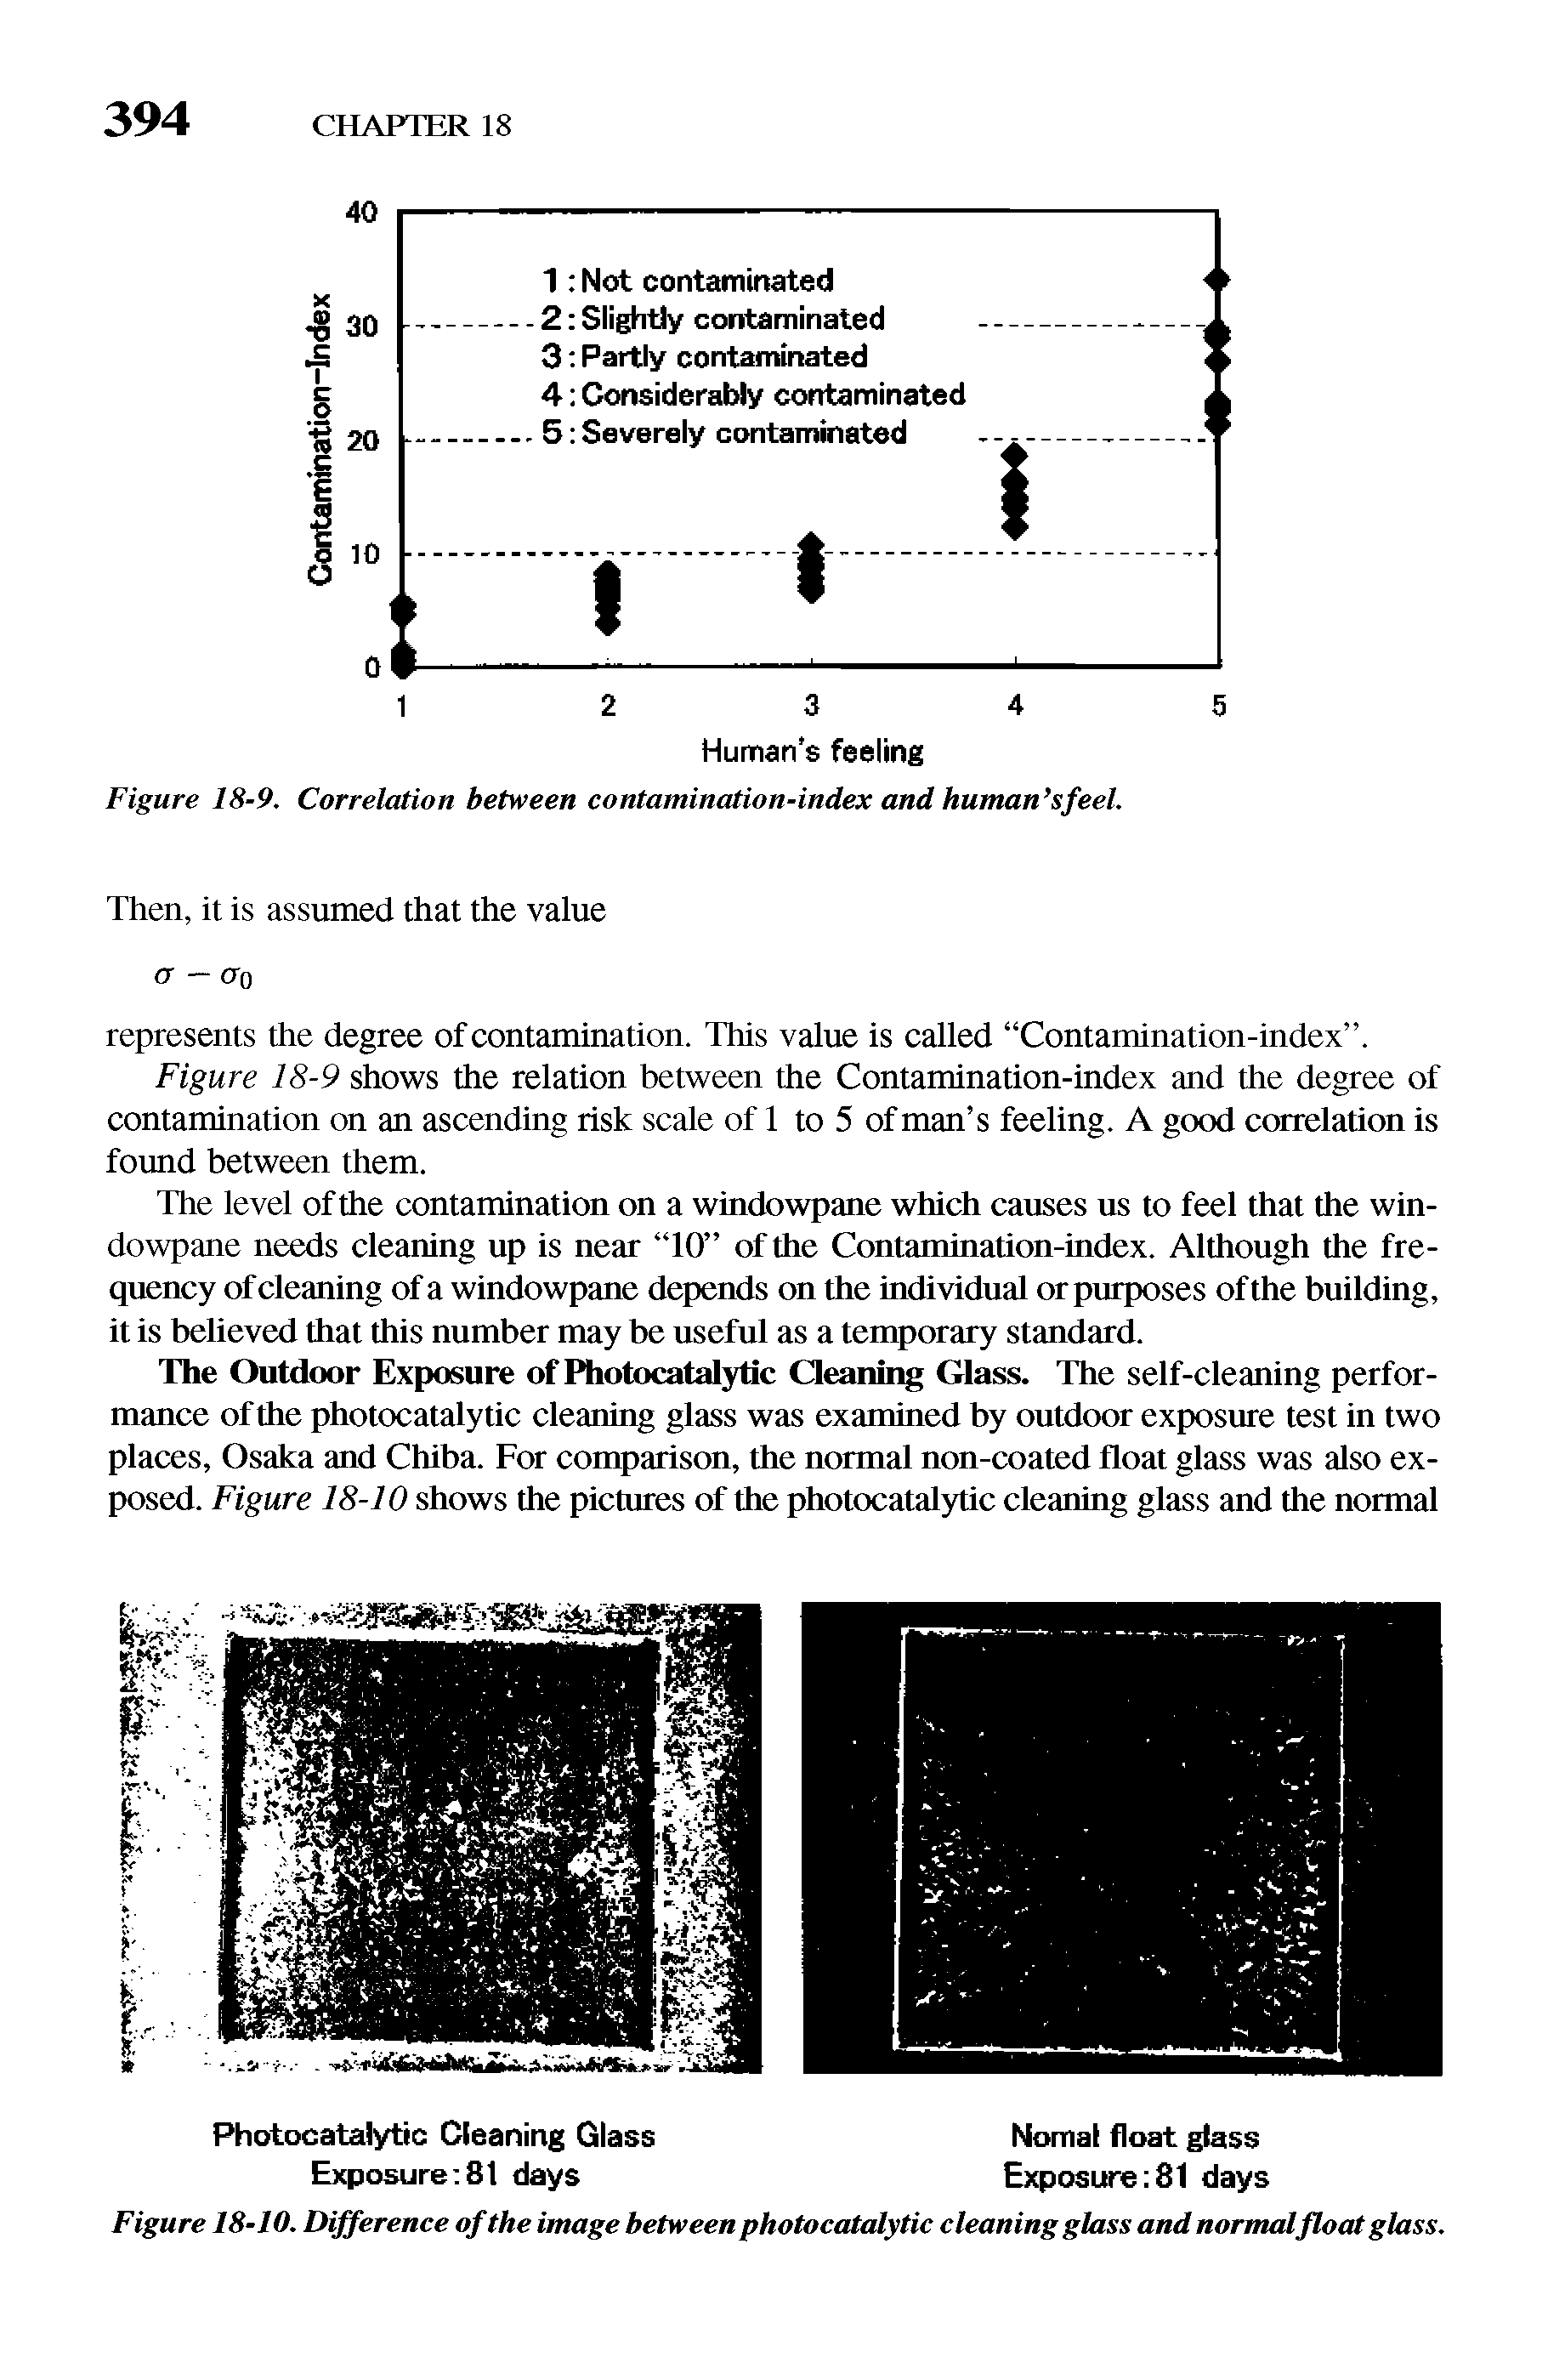 Figure 18-10. Difference ofthe image between photocatalytic cleaning glass and normalfloat glass.